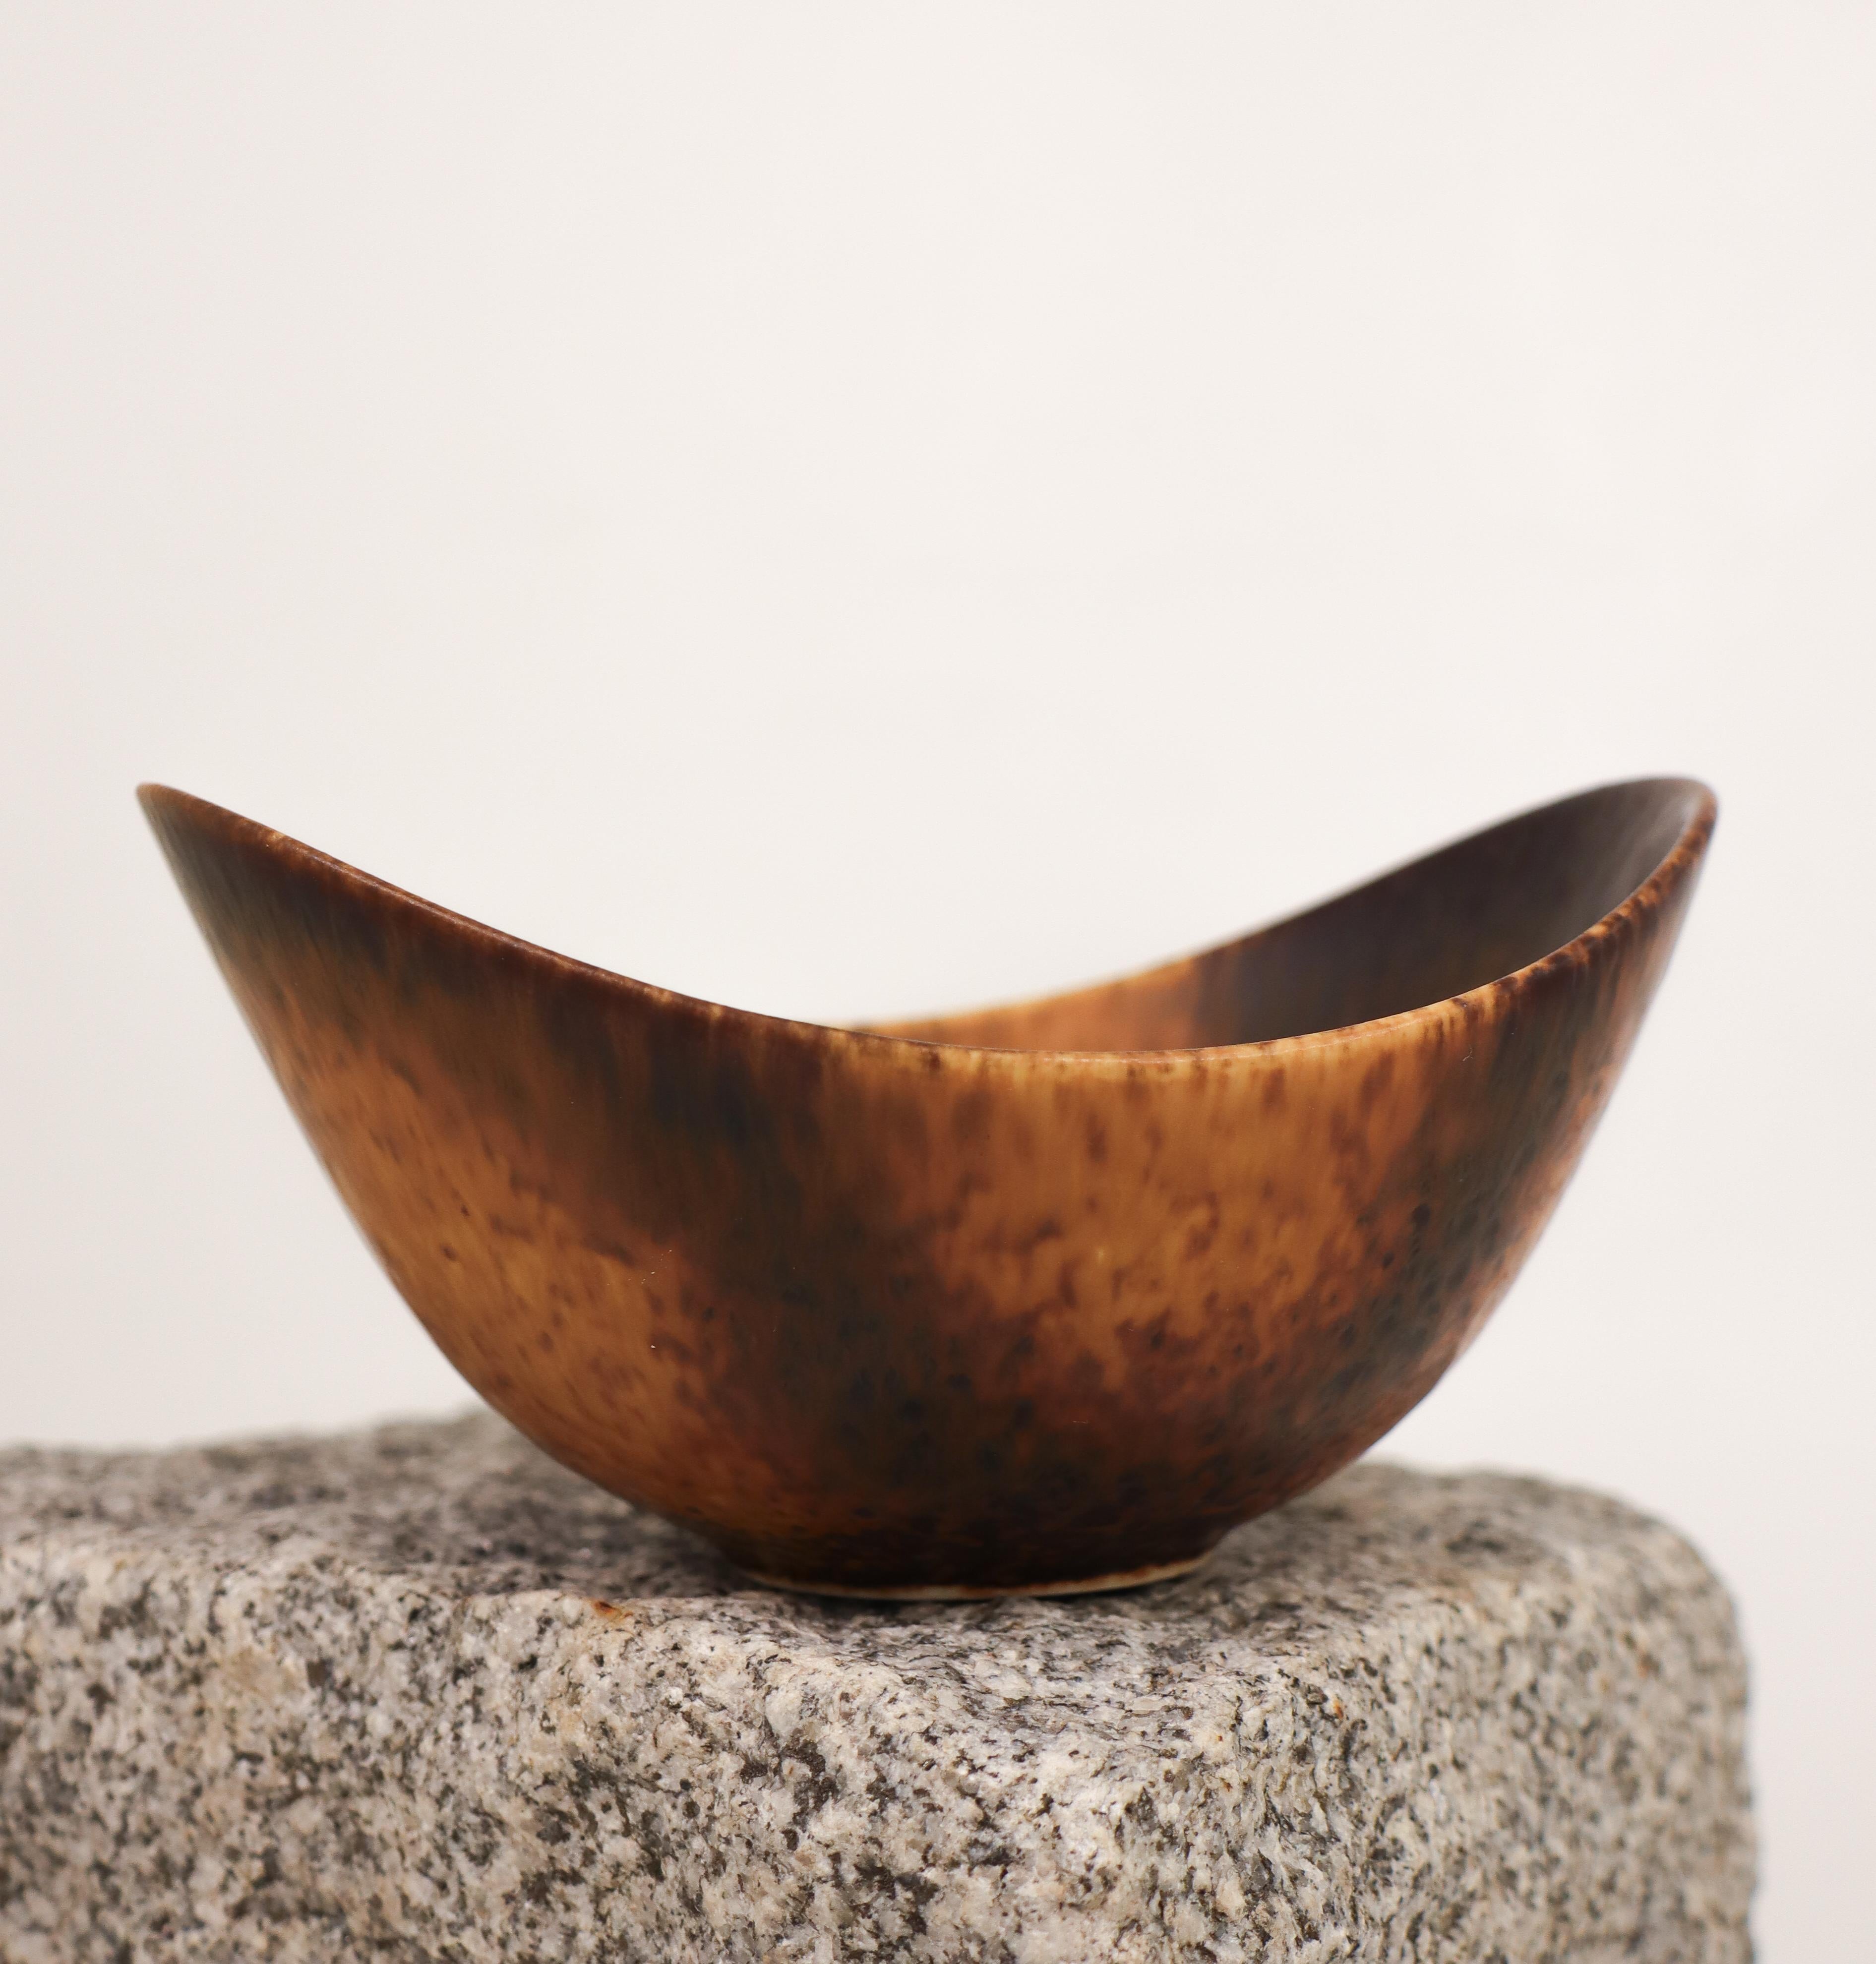 A lovely brown speckled bowl designed by Gunnar Nylund at Rörstrand, the bowl is 12.5 x 15.5 cm (5 x 6.2